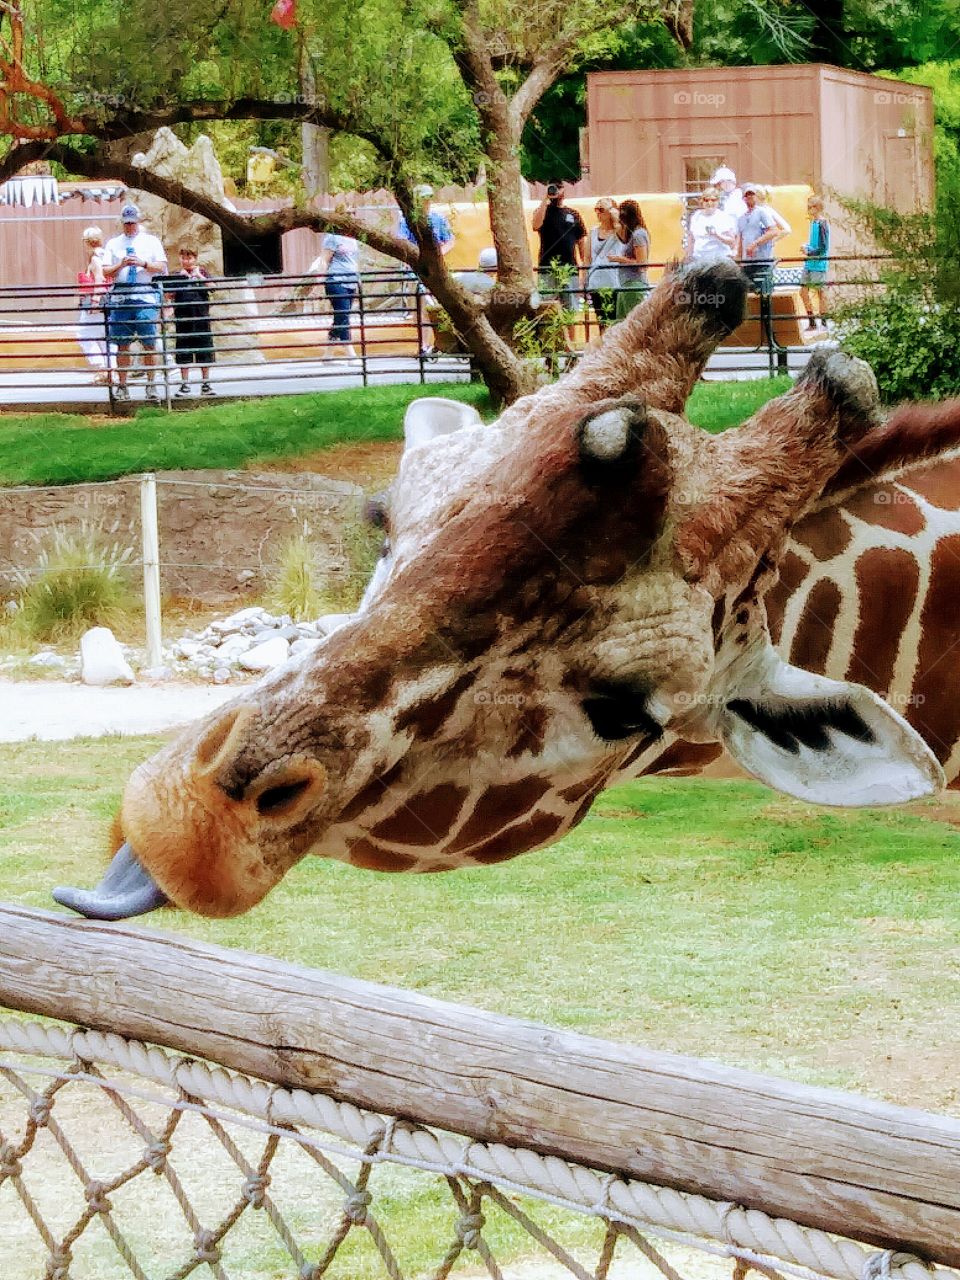 giraffes can have tongues that are 18 to 20 inches long!